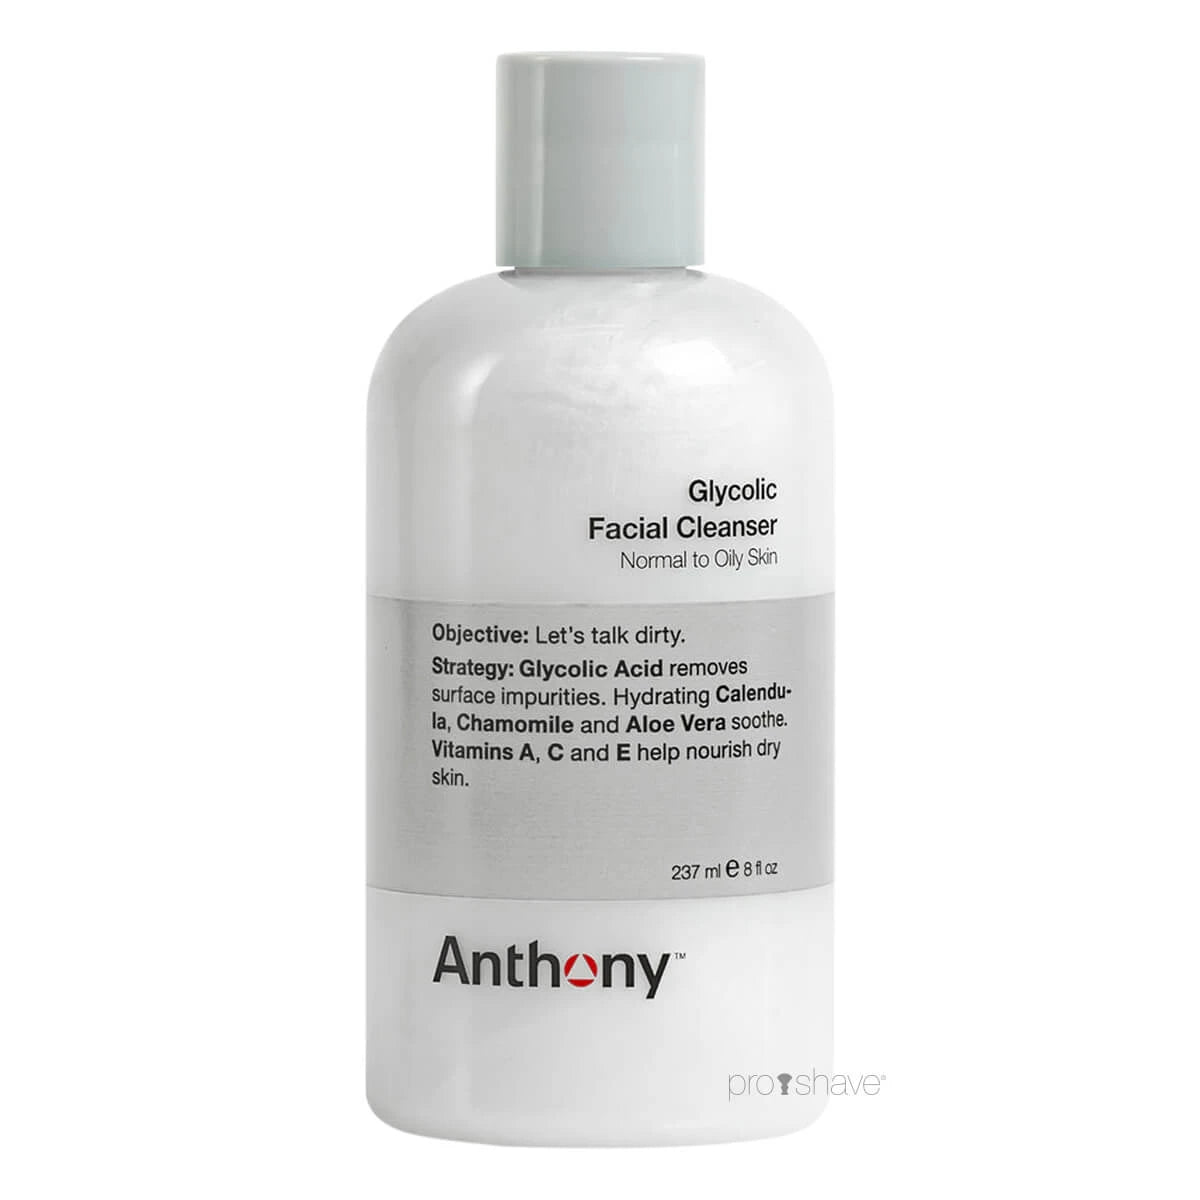 Anthony Glycolic Facial Cleanser, 237 ml.